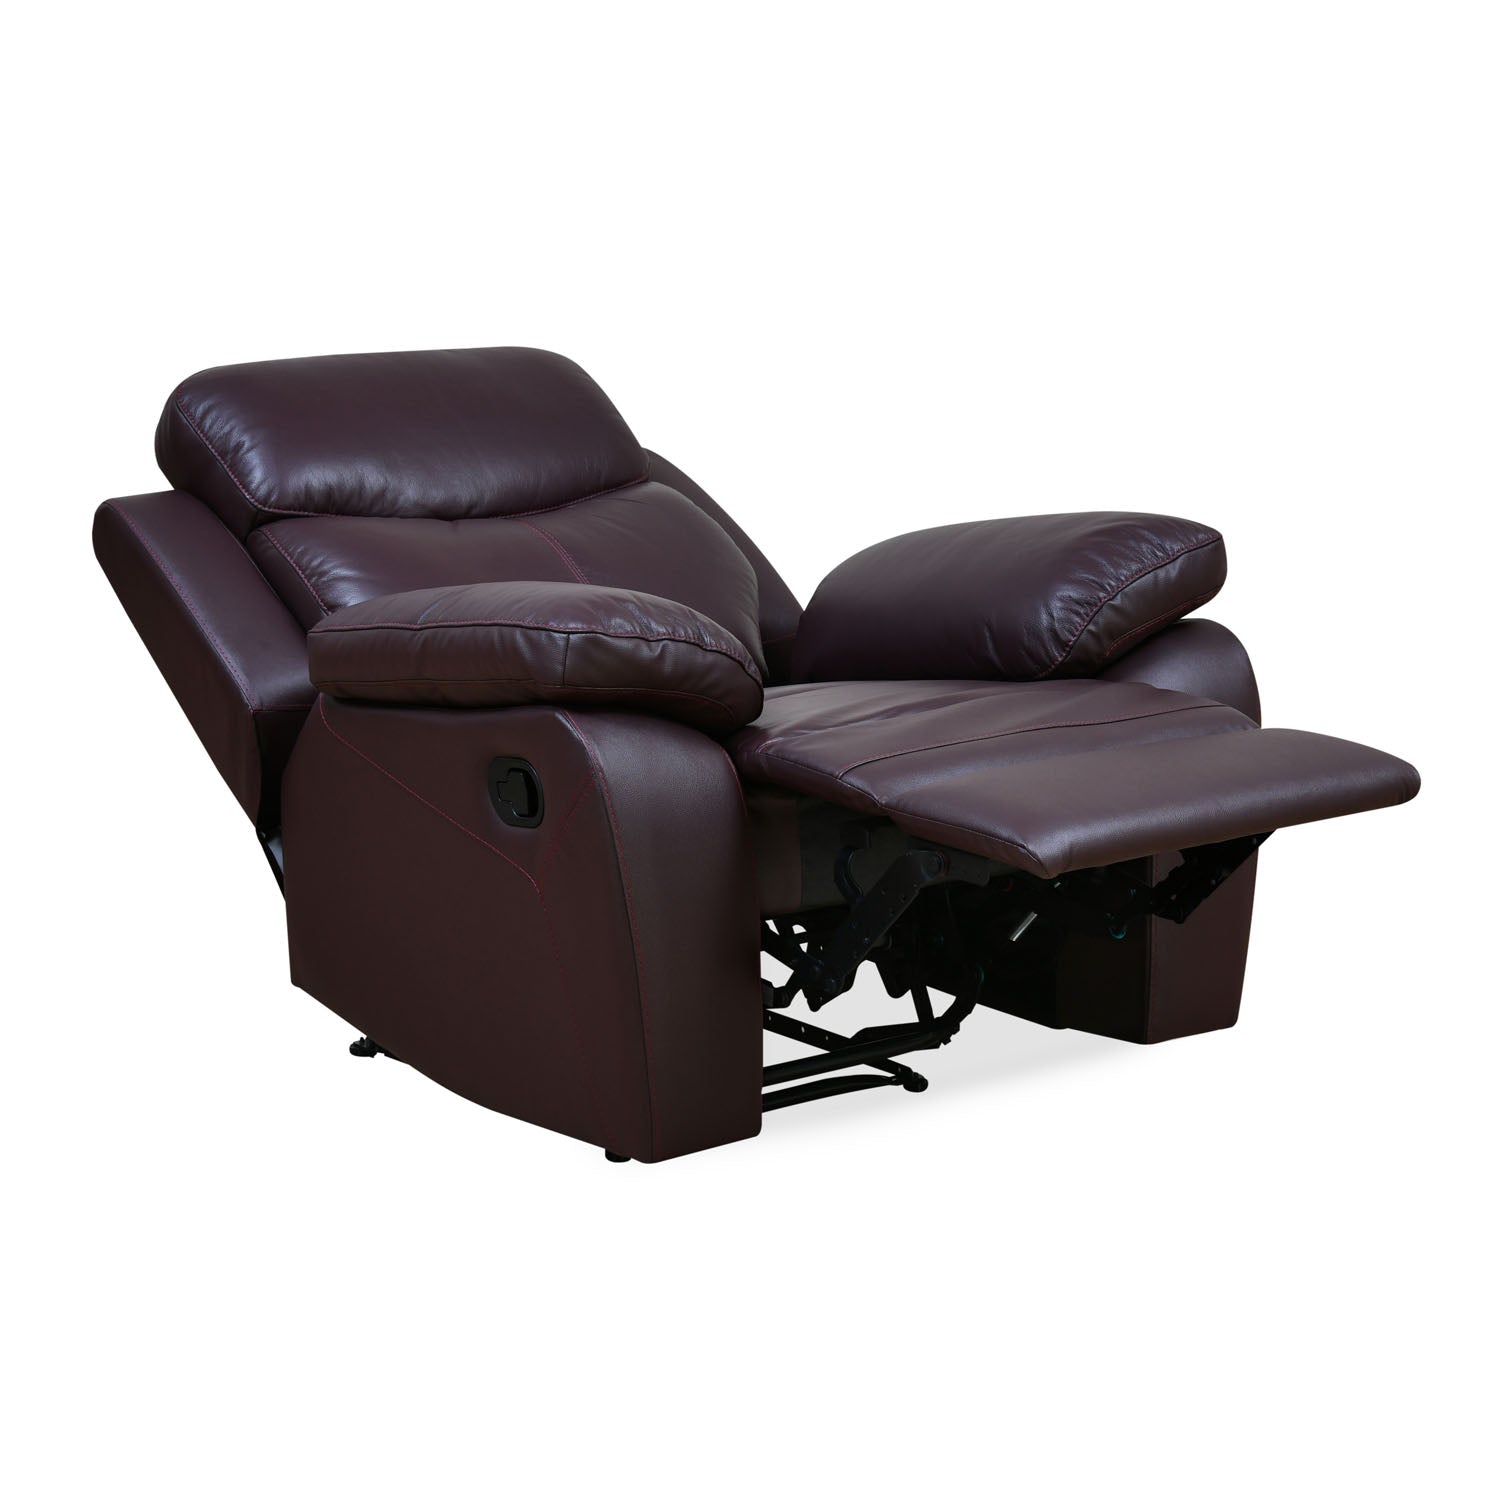 Mandy 1 Seater Leather Manual Recliner (Burgundy)